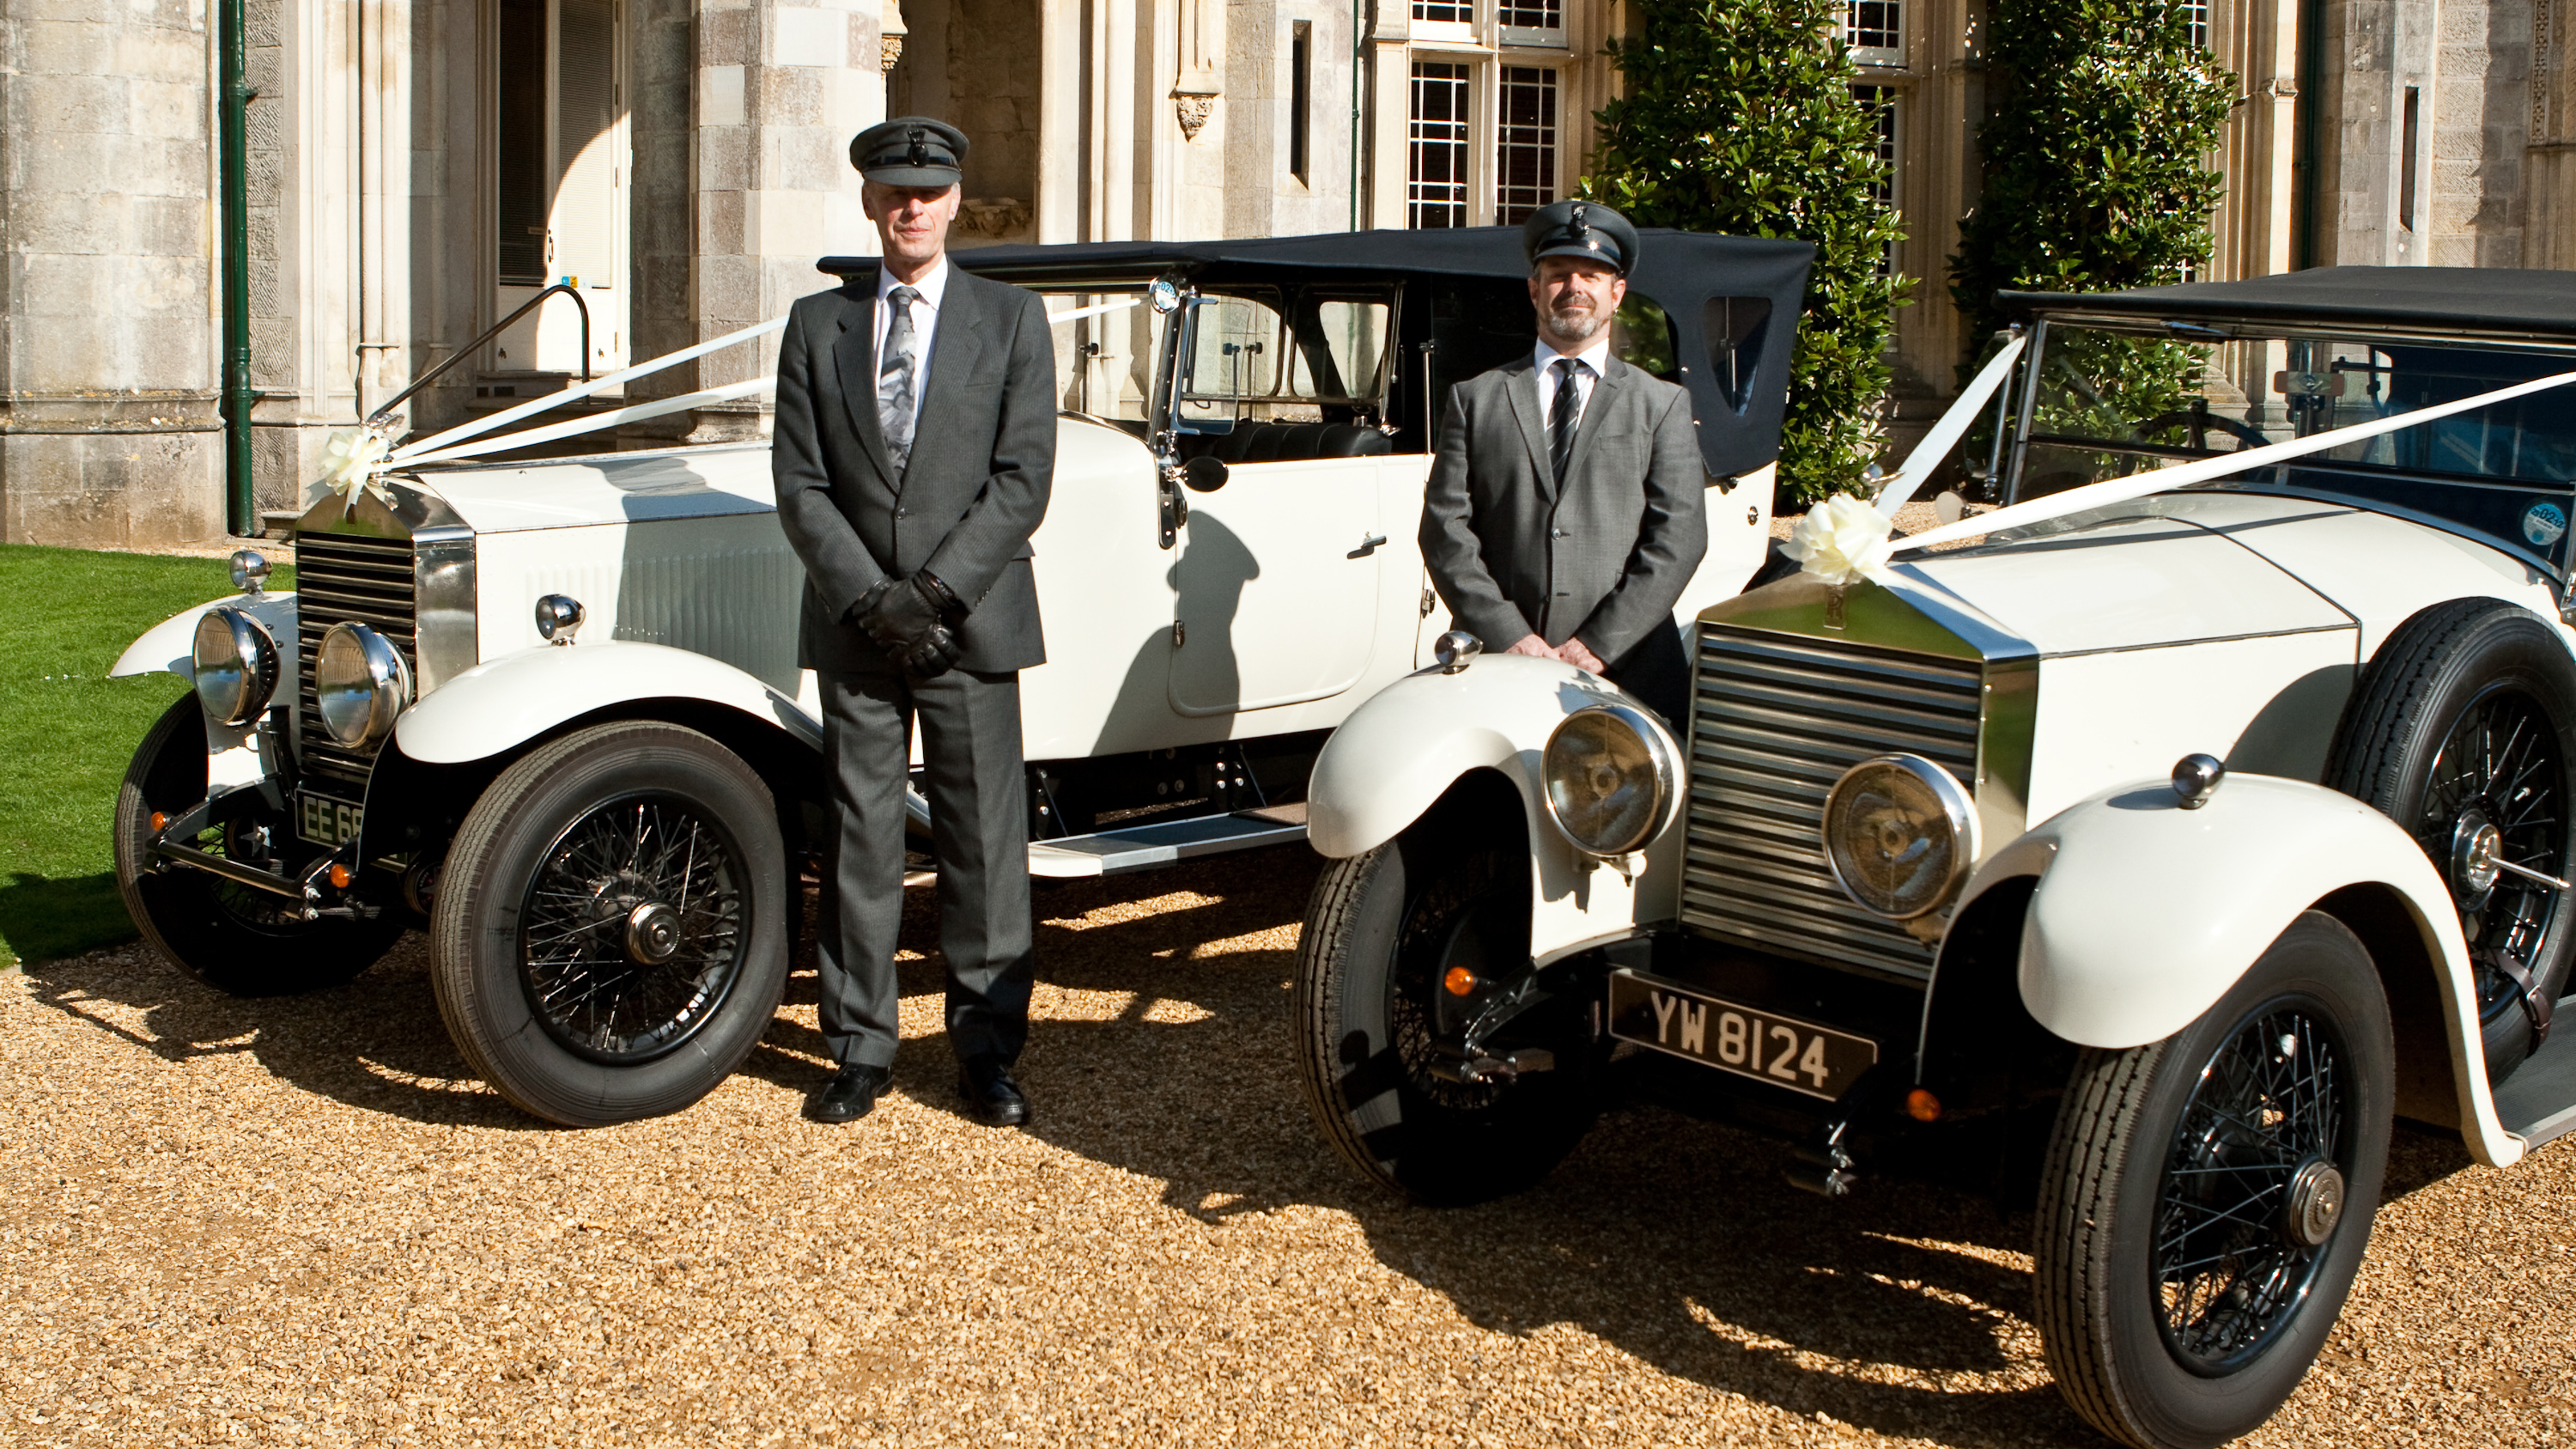 Two vintage wedding cars decorated with white ribbons and bows at a local Beaminster wedding. Both vehicles are parked side-by-side with their chauffeurs next to them.